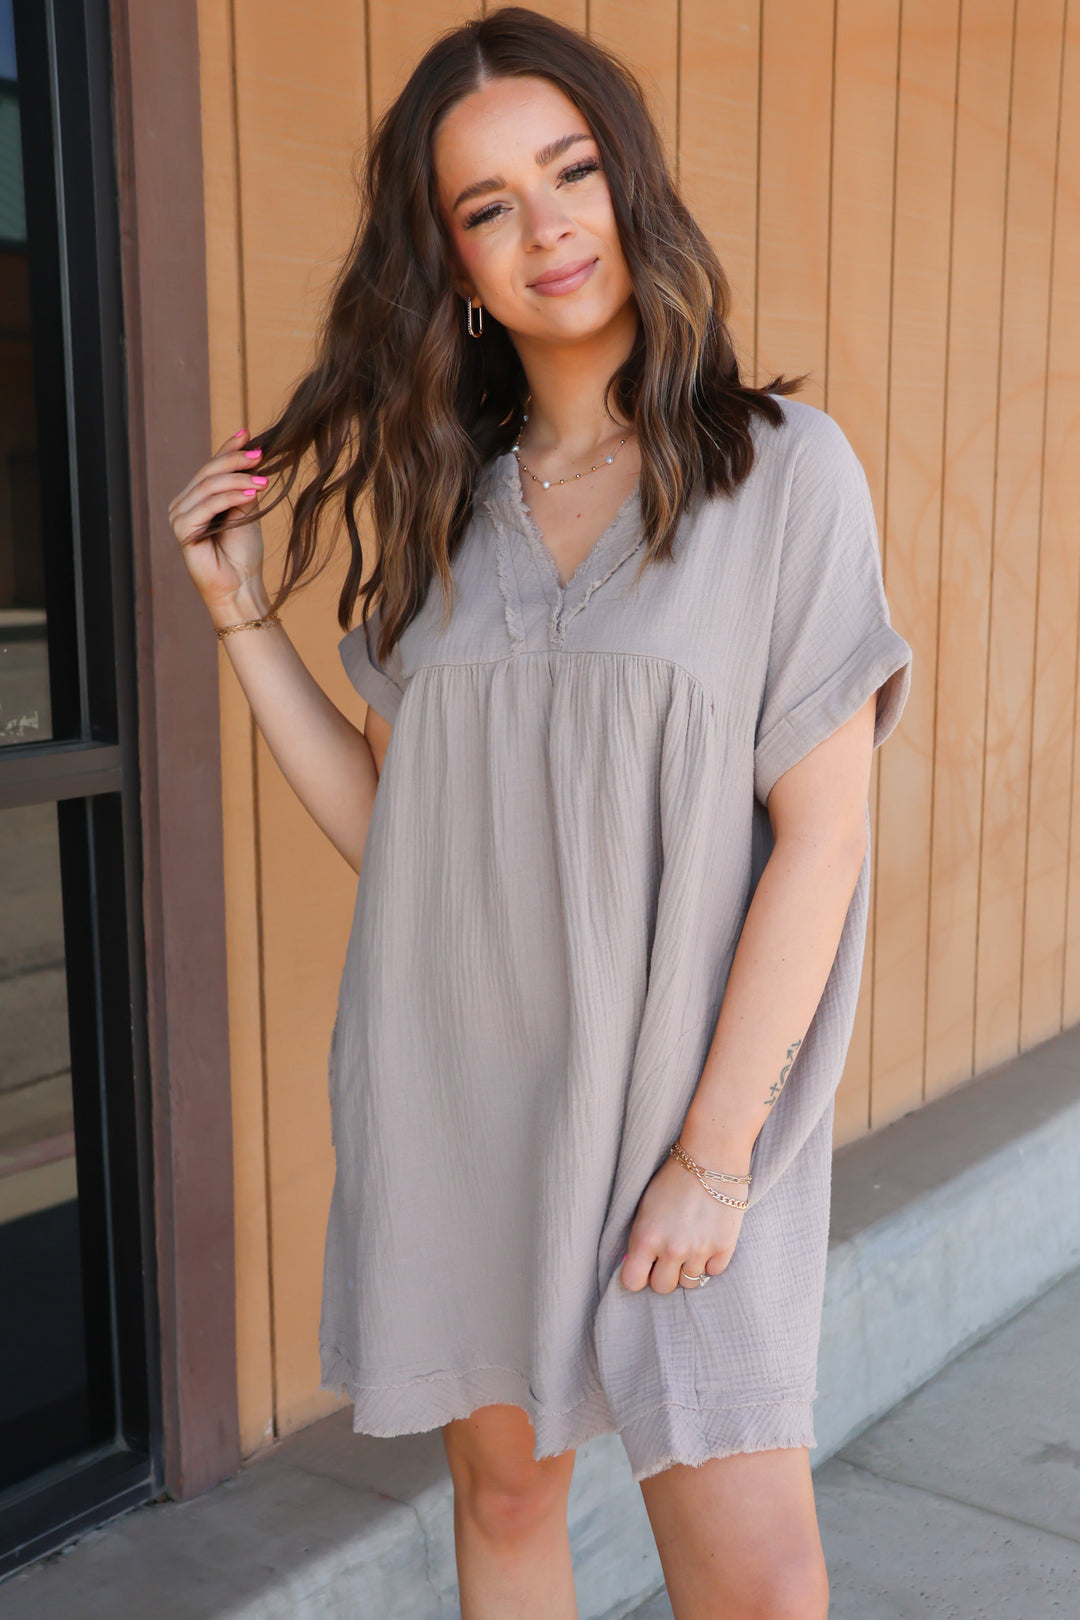 Casually Chic Dress in Mocha - ShopSpoiled